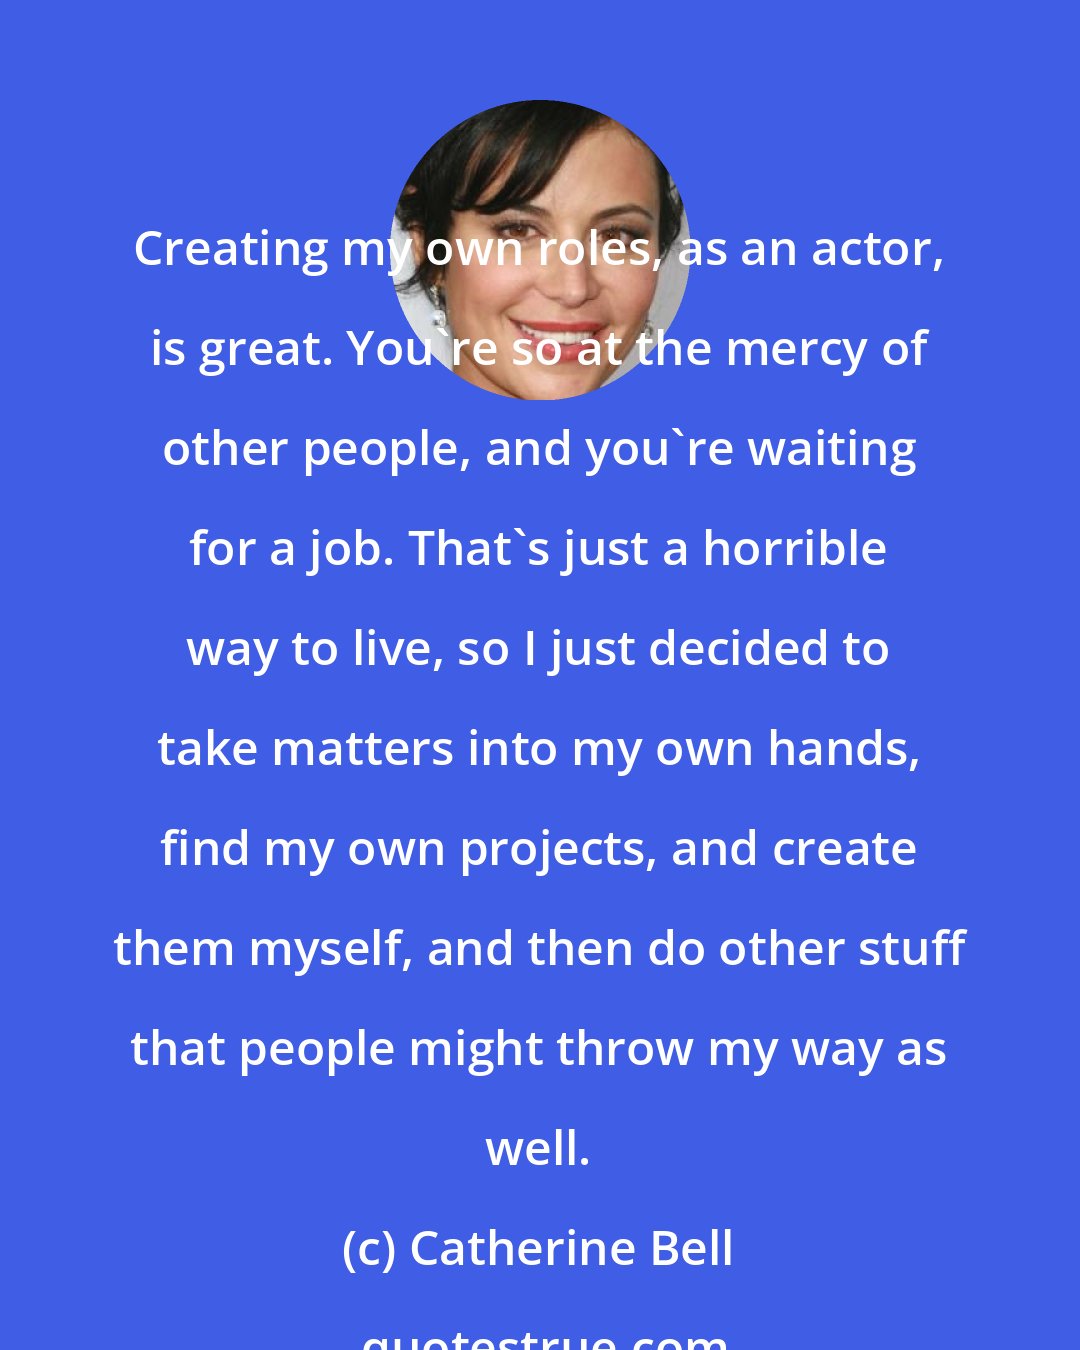 Catherine Bell: Creating my own roles, as an actor, is great. You're so at the mercy of other people, and you're waiting for a job. That's just a horrible way to live, so I just decided to take matters into my own hands, find my own projects, and create them myself, and then do other stuff that people might throw my way as well.